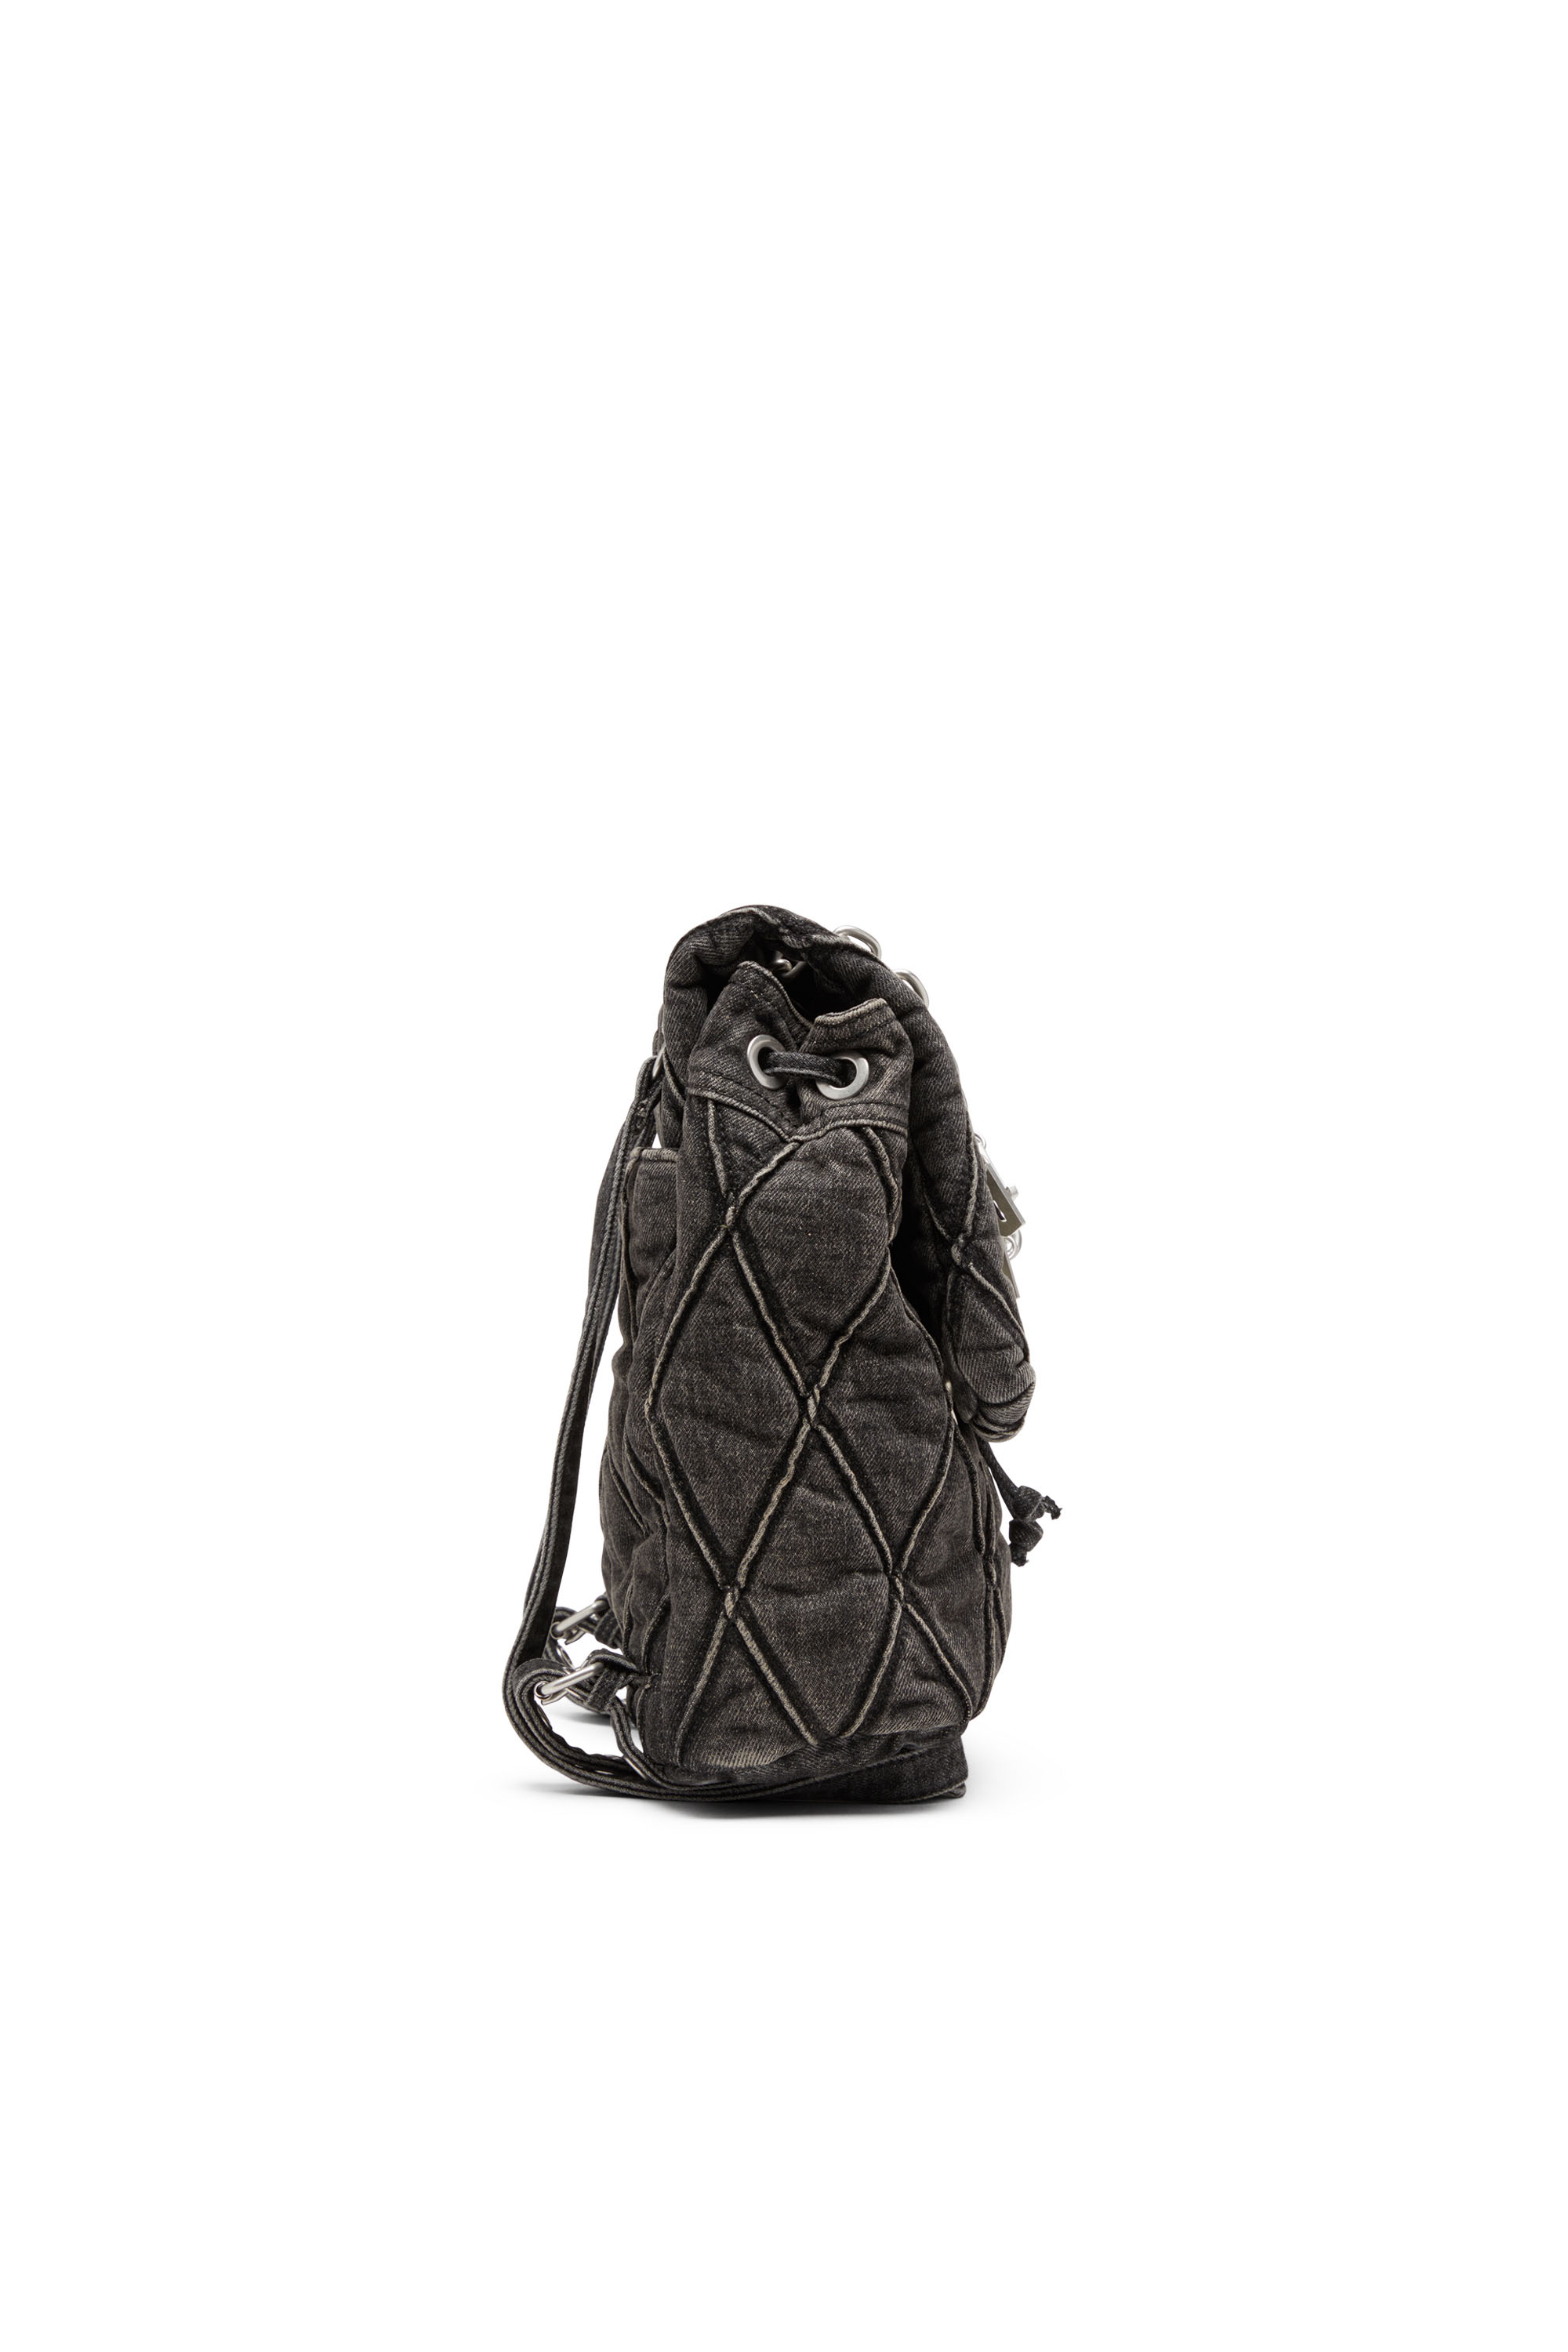 Diesel - CHARM-D BACKPACK S, Female Charm-D S-Backpack in Argyle quilted denim in ブラック - Image 3